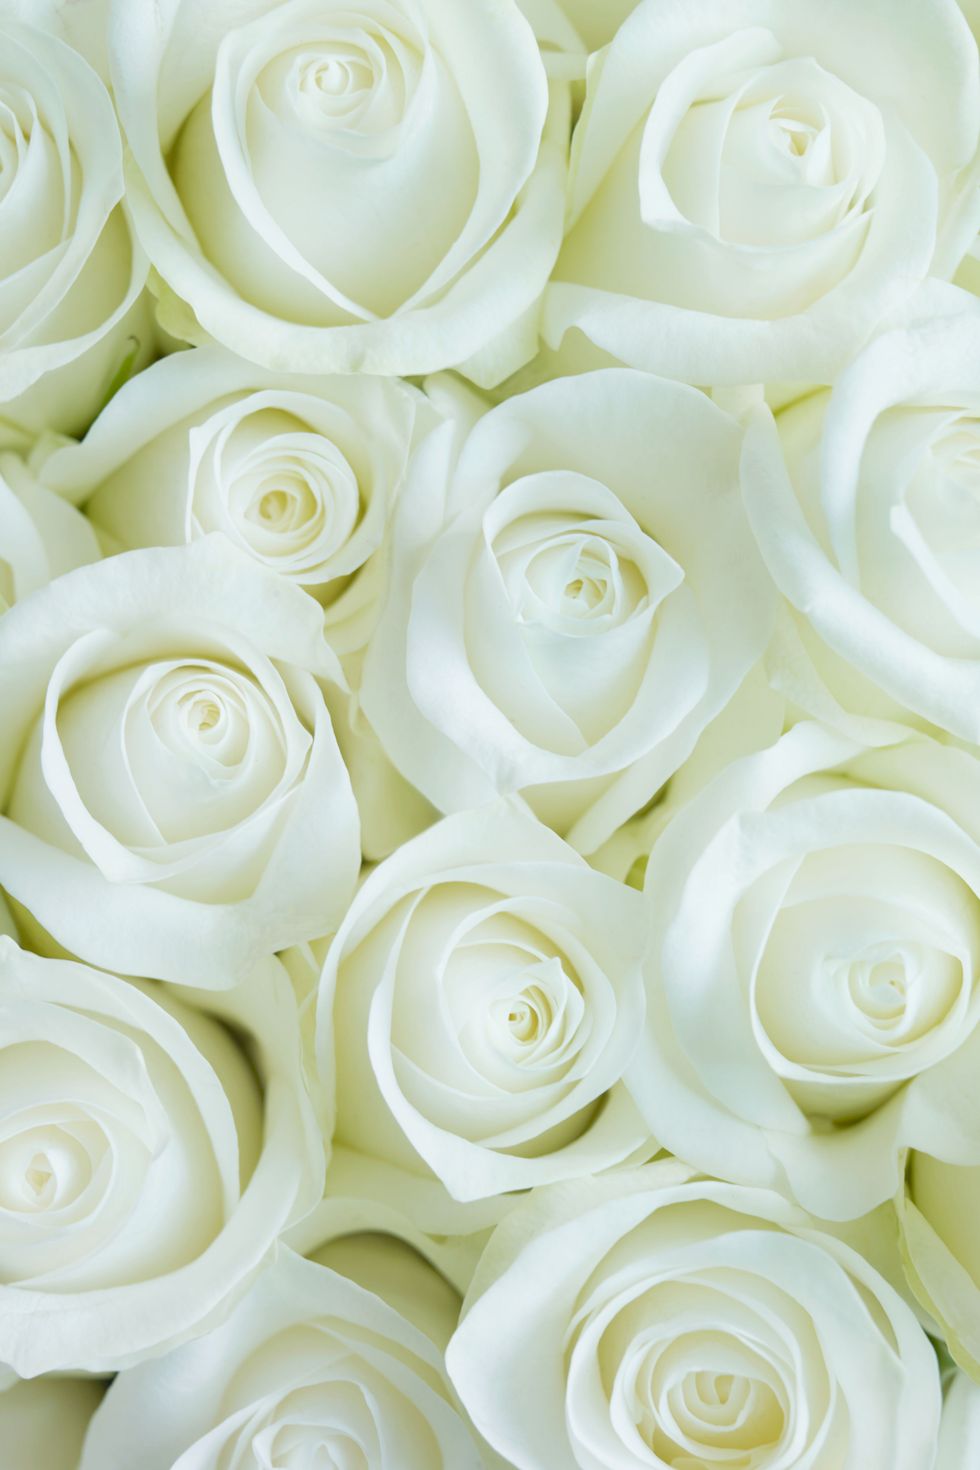 Yellow, Petal, Flower, White, Flowering plant, Rose family, Rose, Ivory, Cut flowers, Bouquet, 